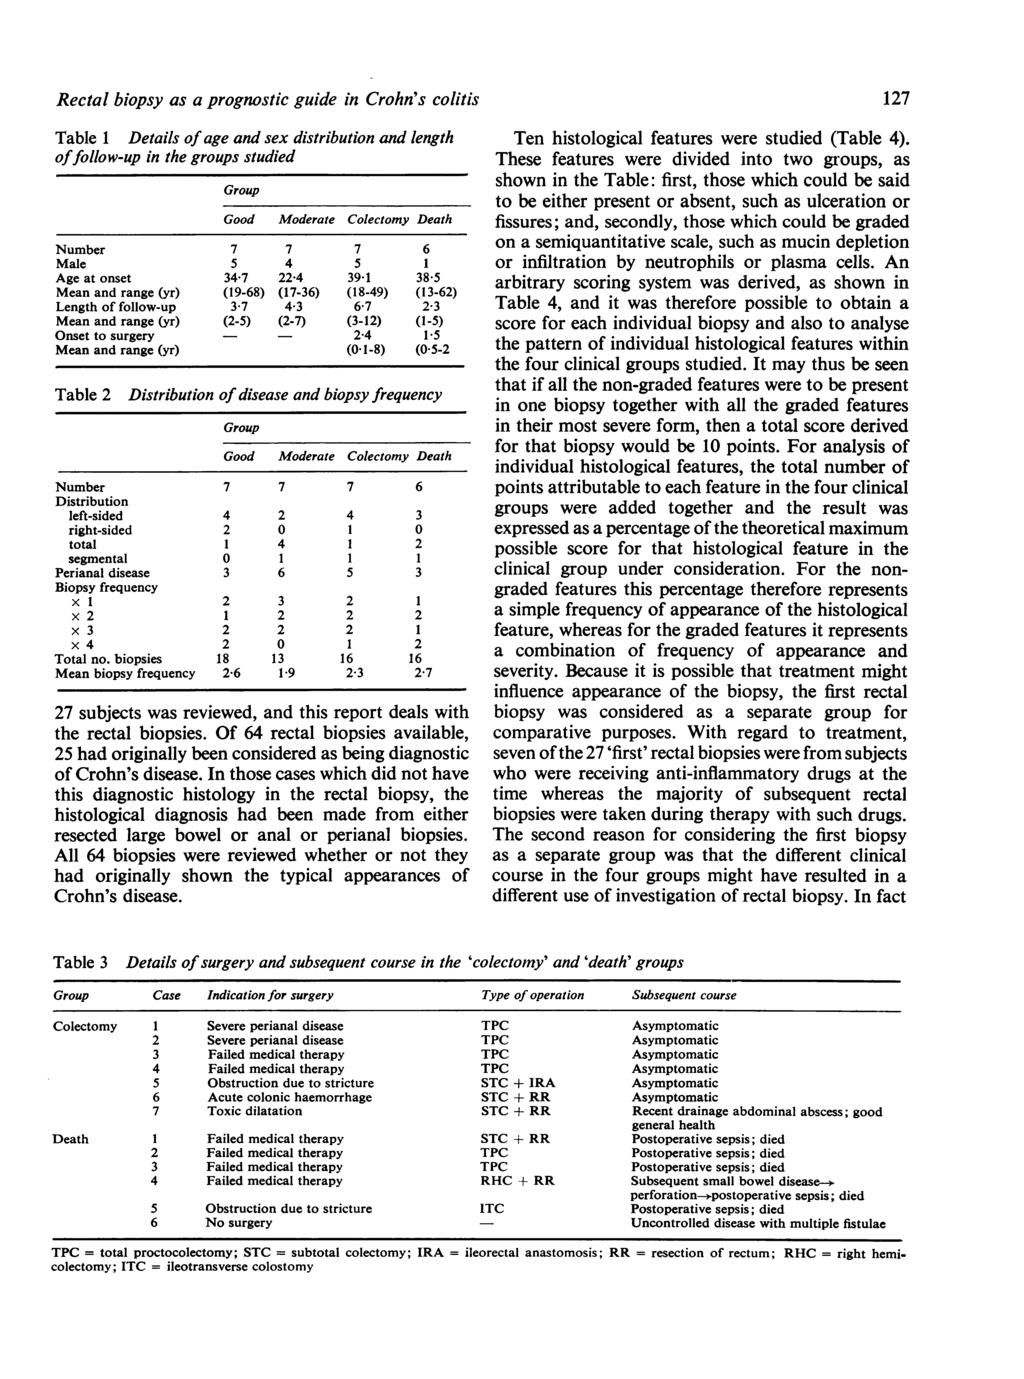 Rectal biopsy as a prognostic guide in Crohn's colitis Table 1 Details of age and sex distribution and length offollow-up in the groups studied Group Good Moderate Colectomy Death Number 7 7 7 6 Male